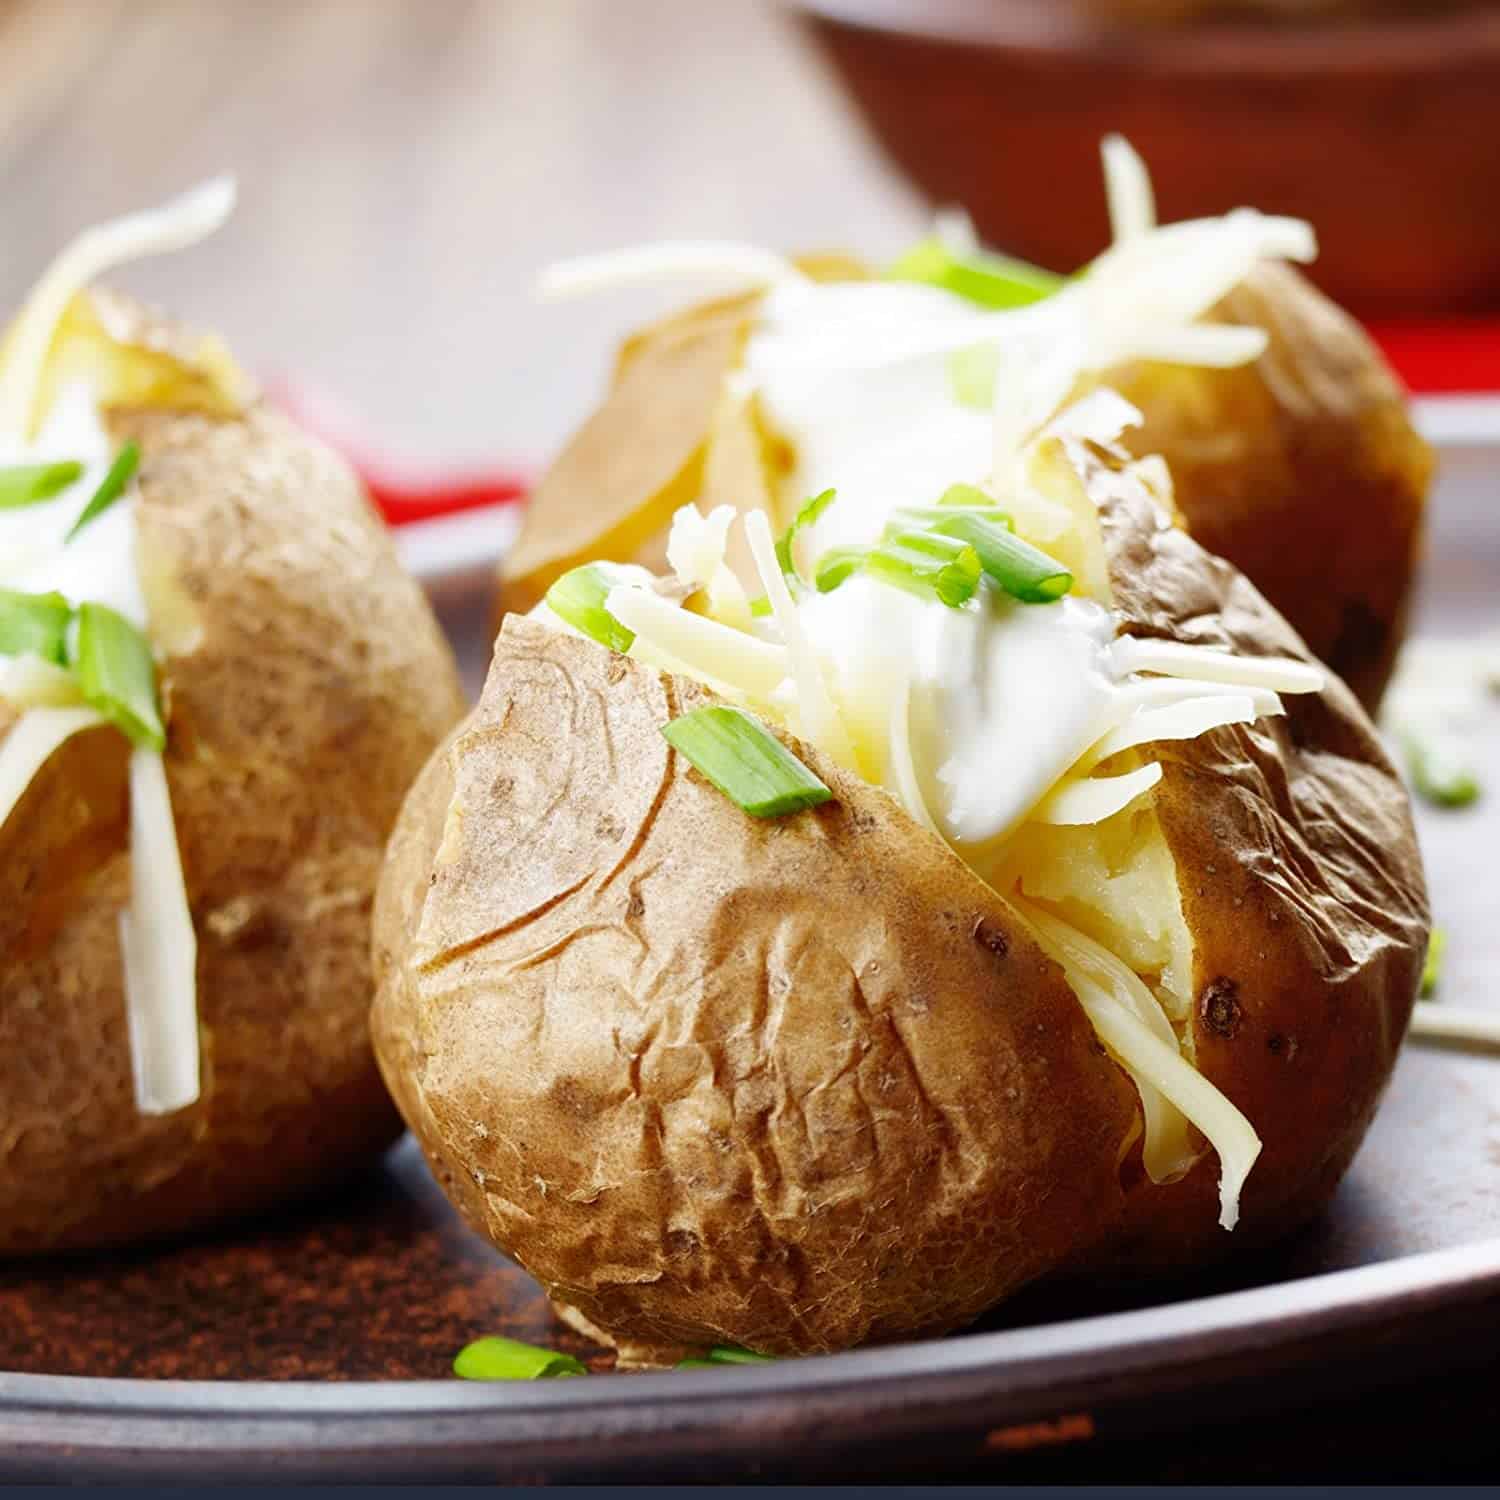 Sour Cream, Cheddar and Chive Twice Baked Potatoes, 10 count, 5 oz each ...